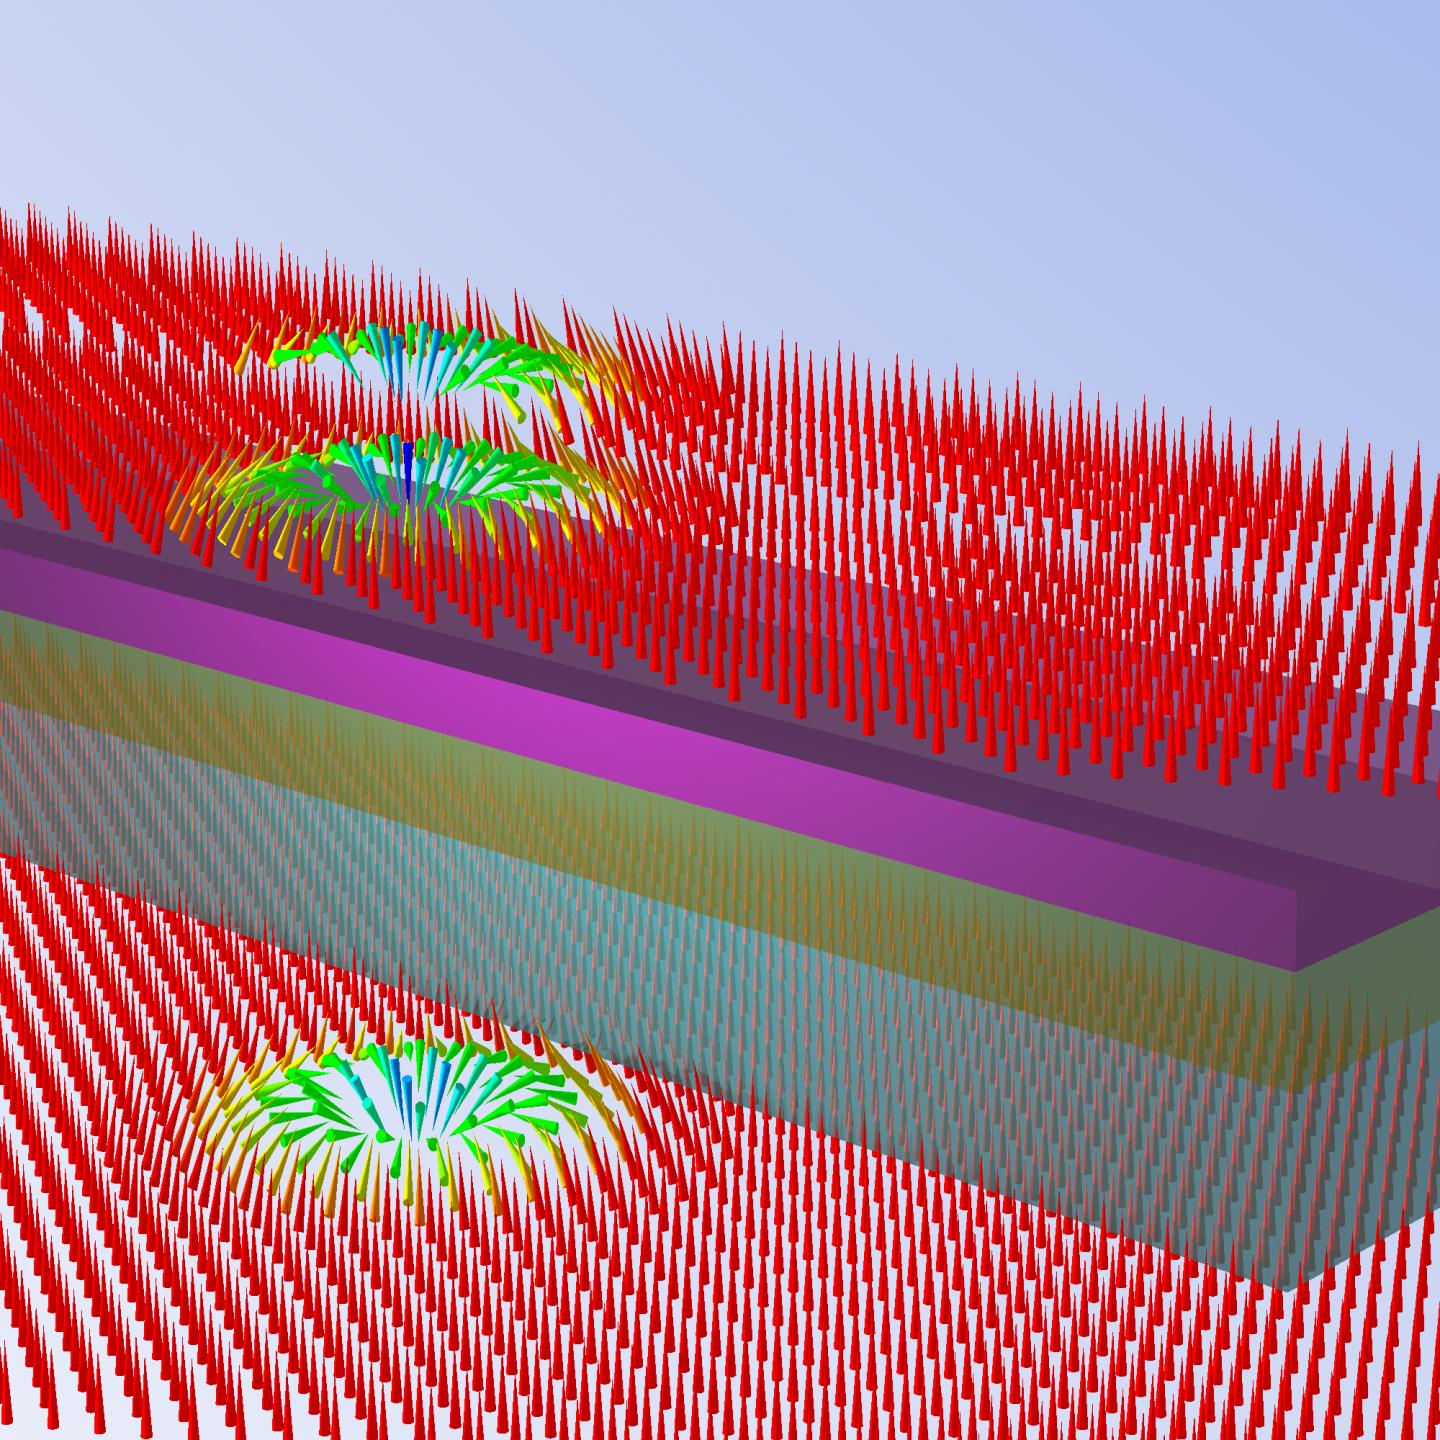 Skyrmions in a Metallic Layer Structure